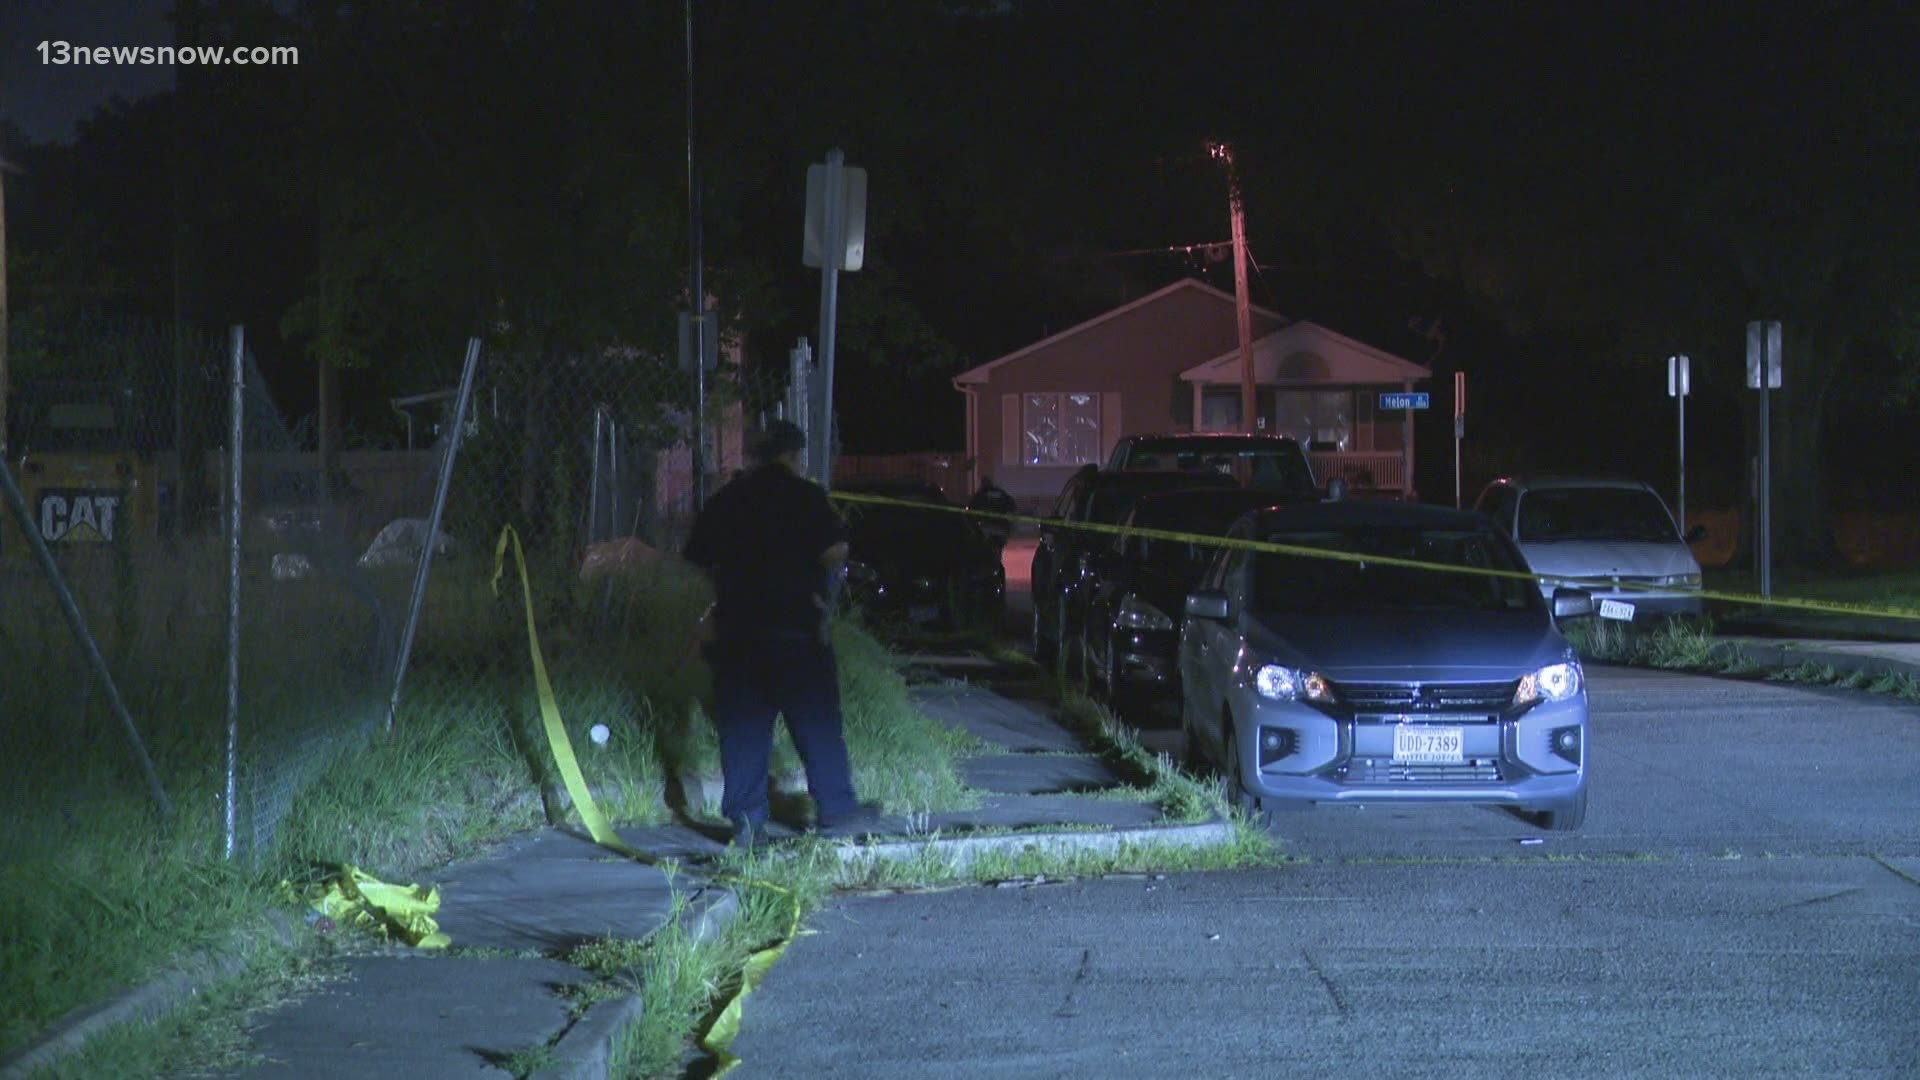 Norfolk police said three teens were shot overnight on Thurgood Street in Diggs Town. One of them did not survive his injuries, the other two are expected to be OK.